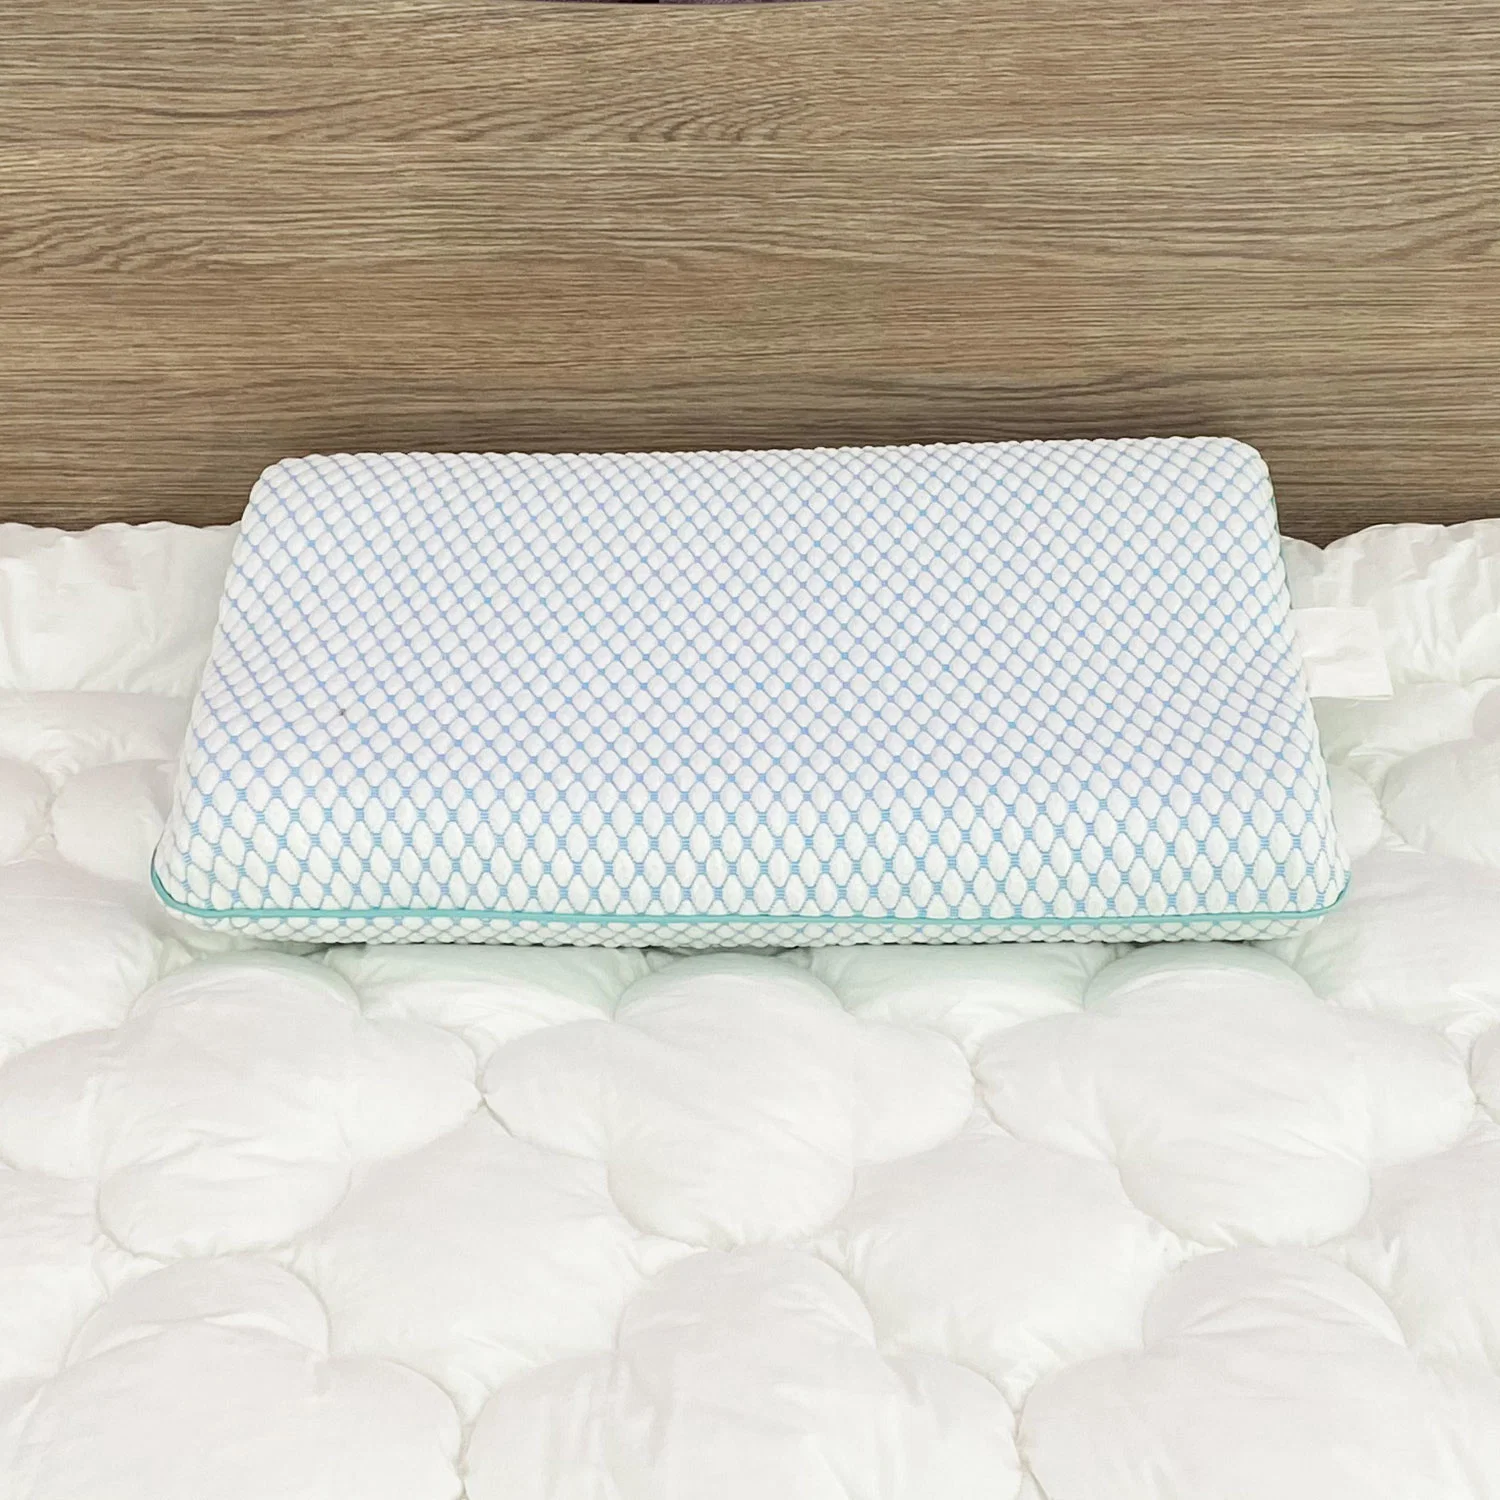 Factory Memory Hotel Travel Bedding Breathable White Cooling Gel Pad Foam Pillow